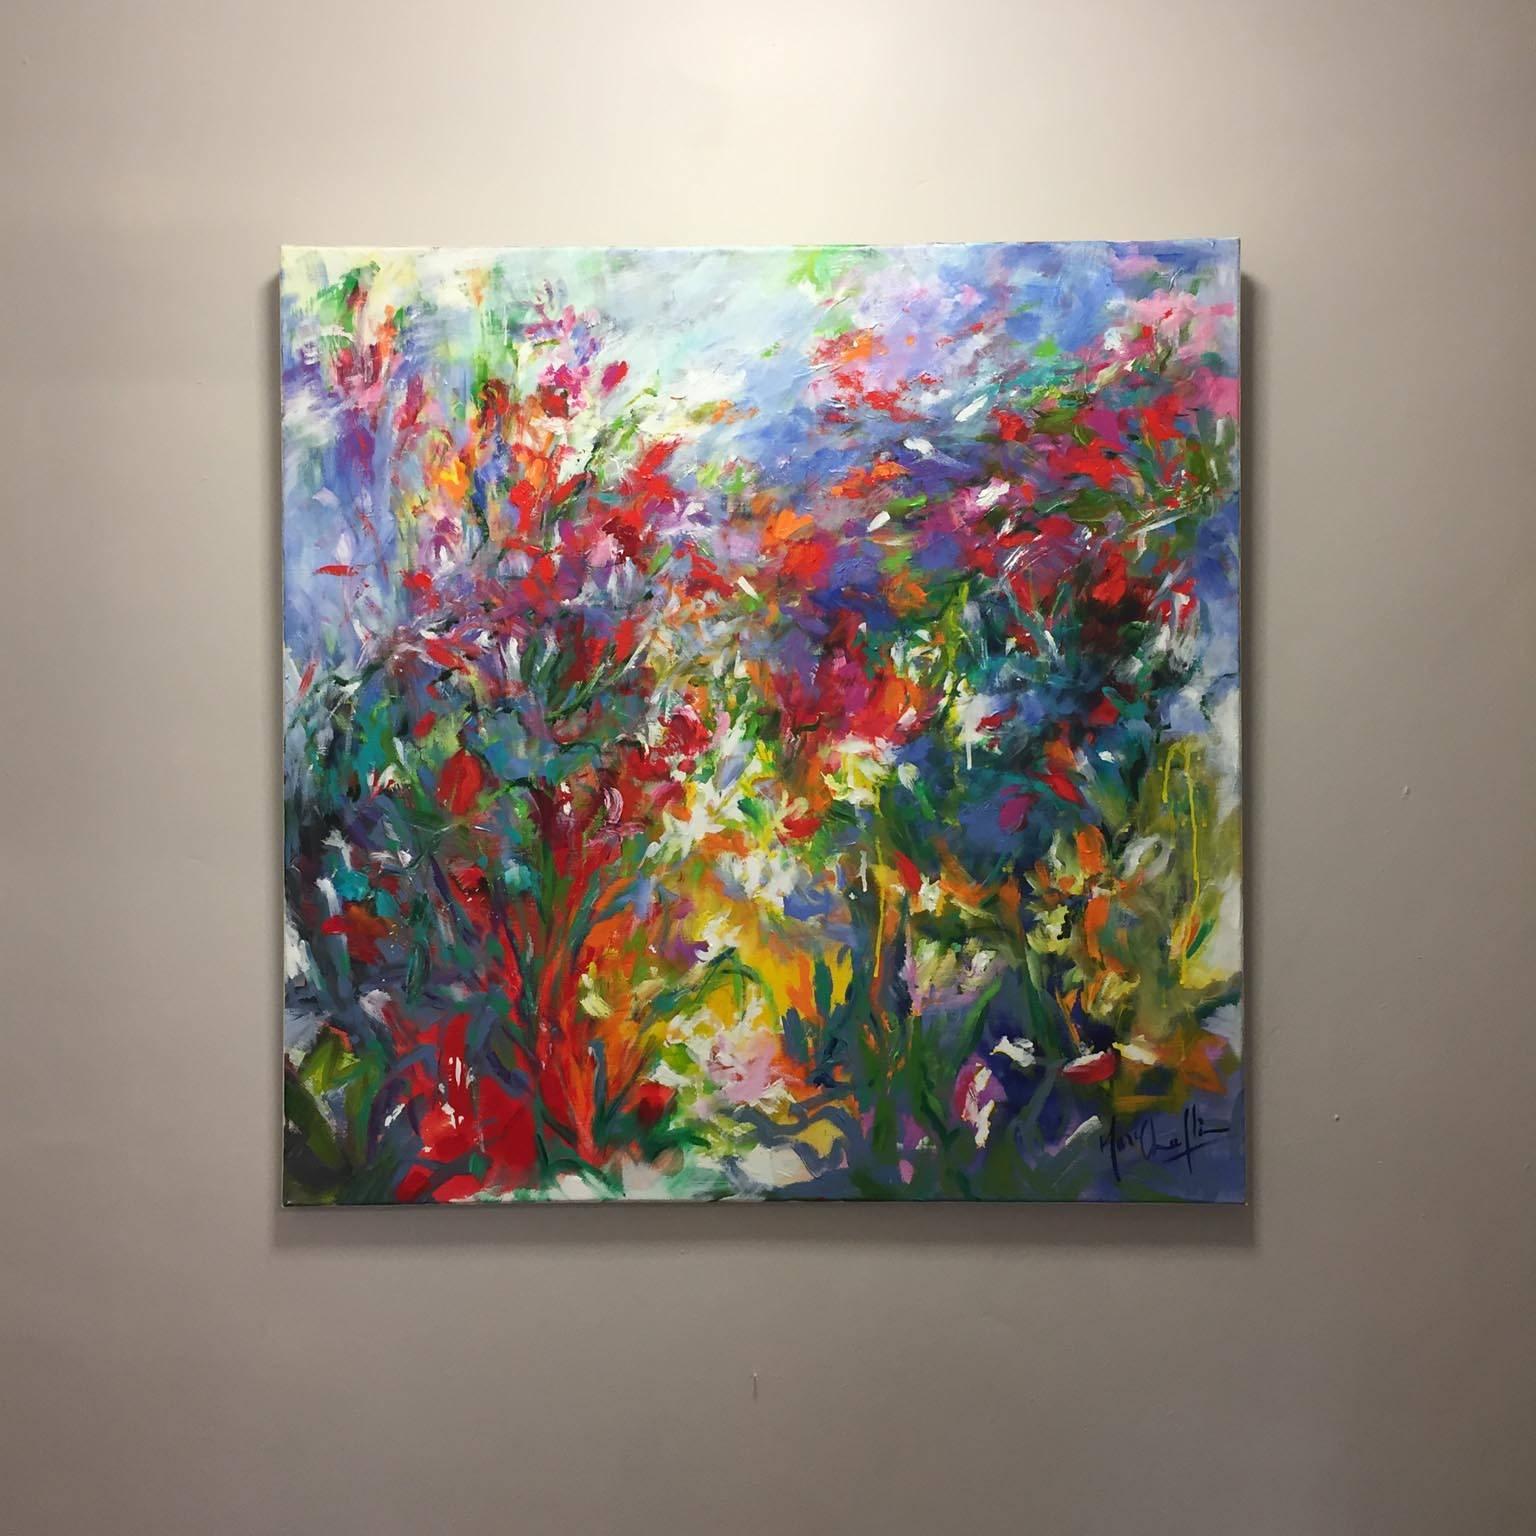 Mary Chaplin, ‘A gust of wind’ features the artist, Mary's, own garden, full of bright colour and light, painted in a semi-abstract style. This work has been created using acrylic paint on canvas. Mary Chaplin says: "I express the well-being